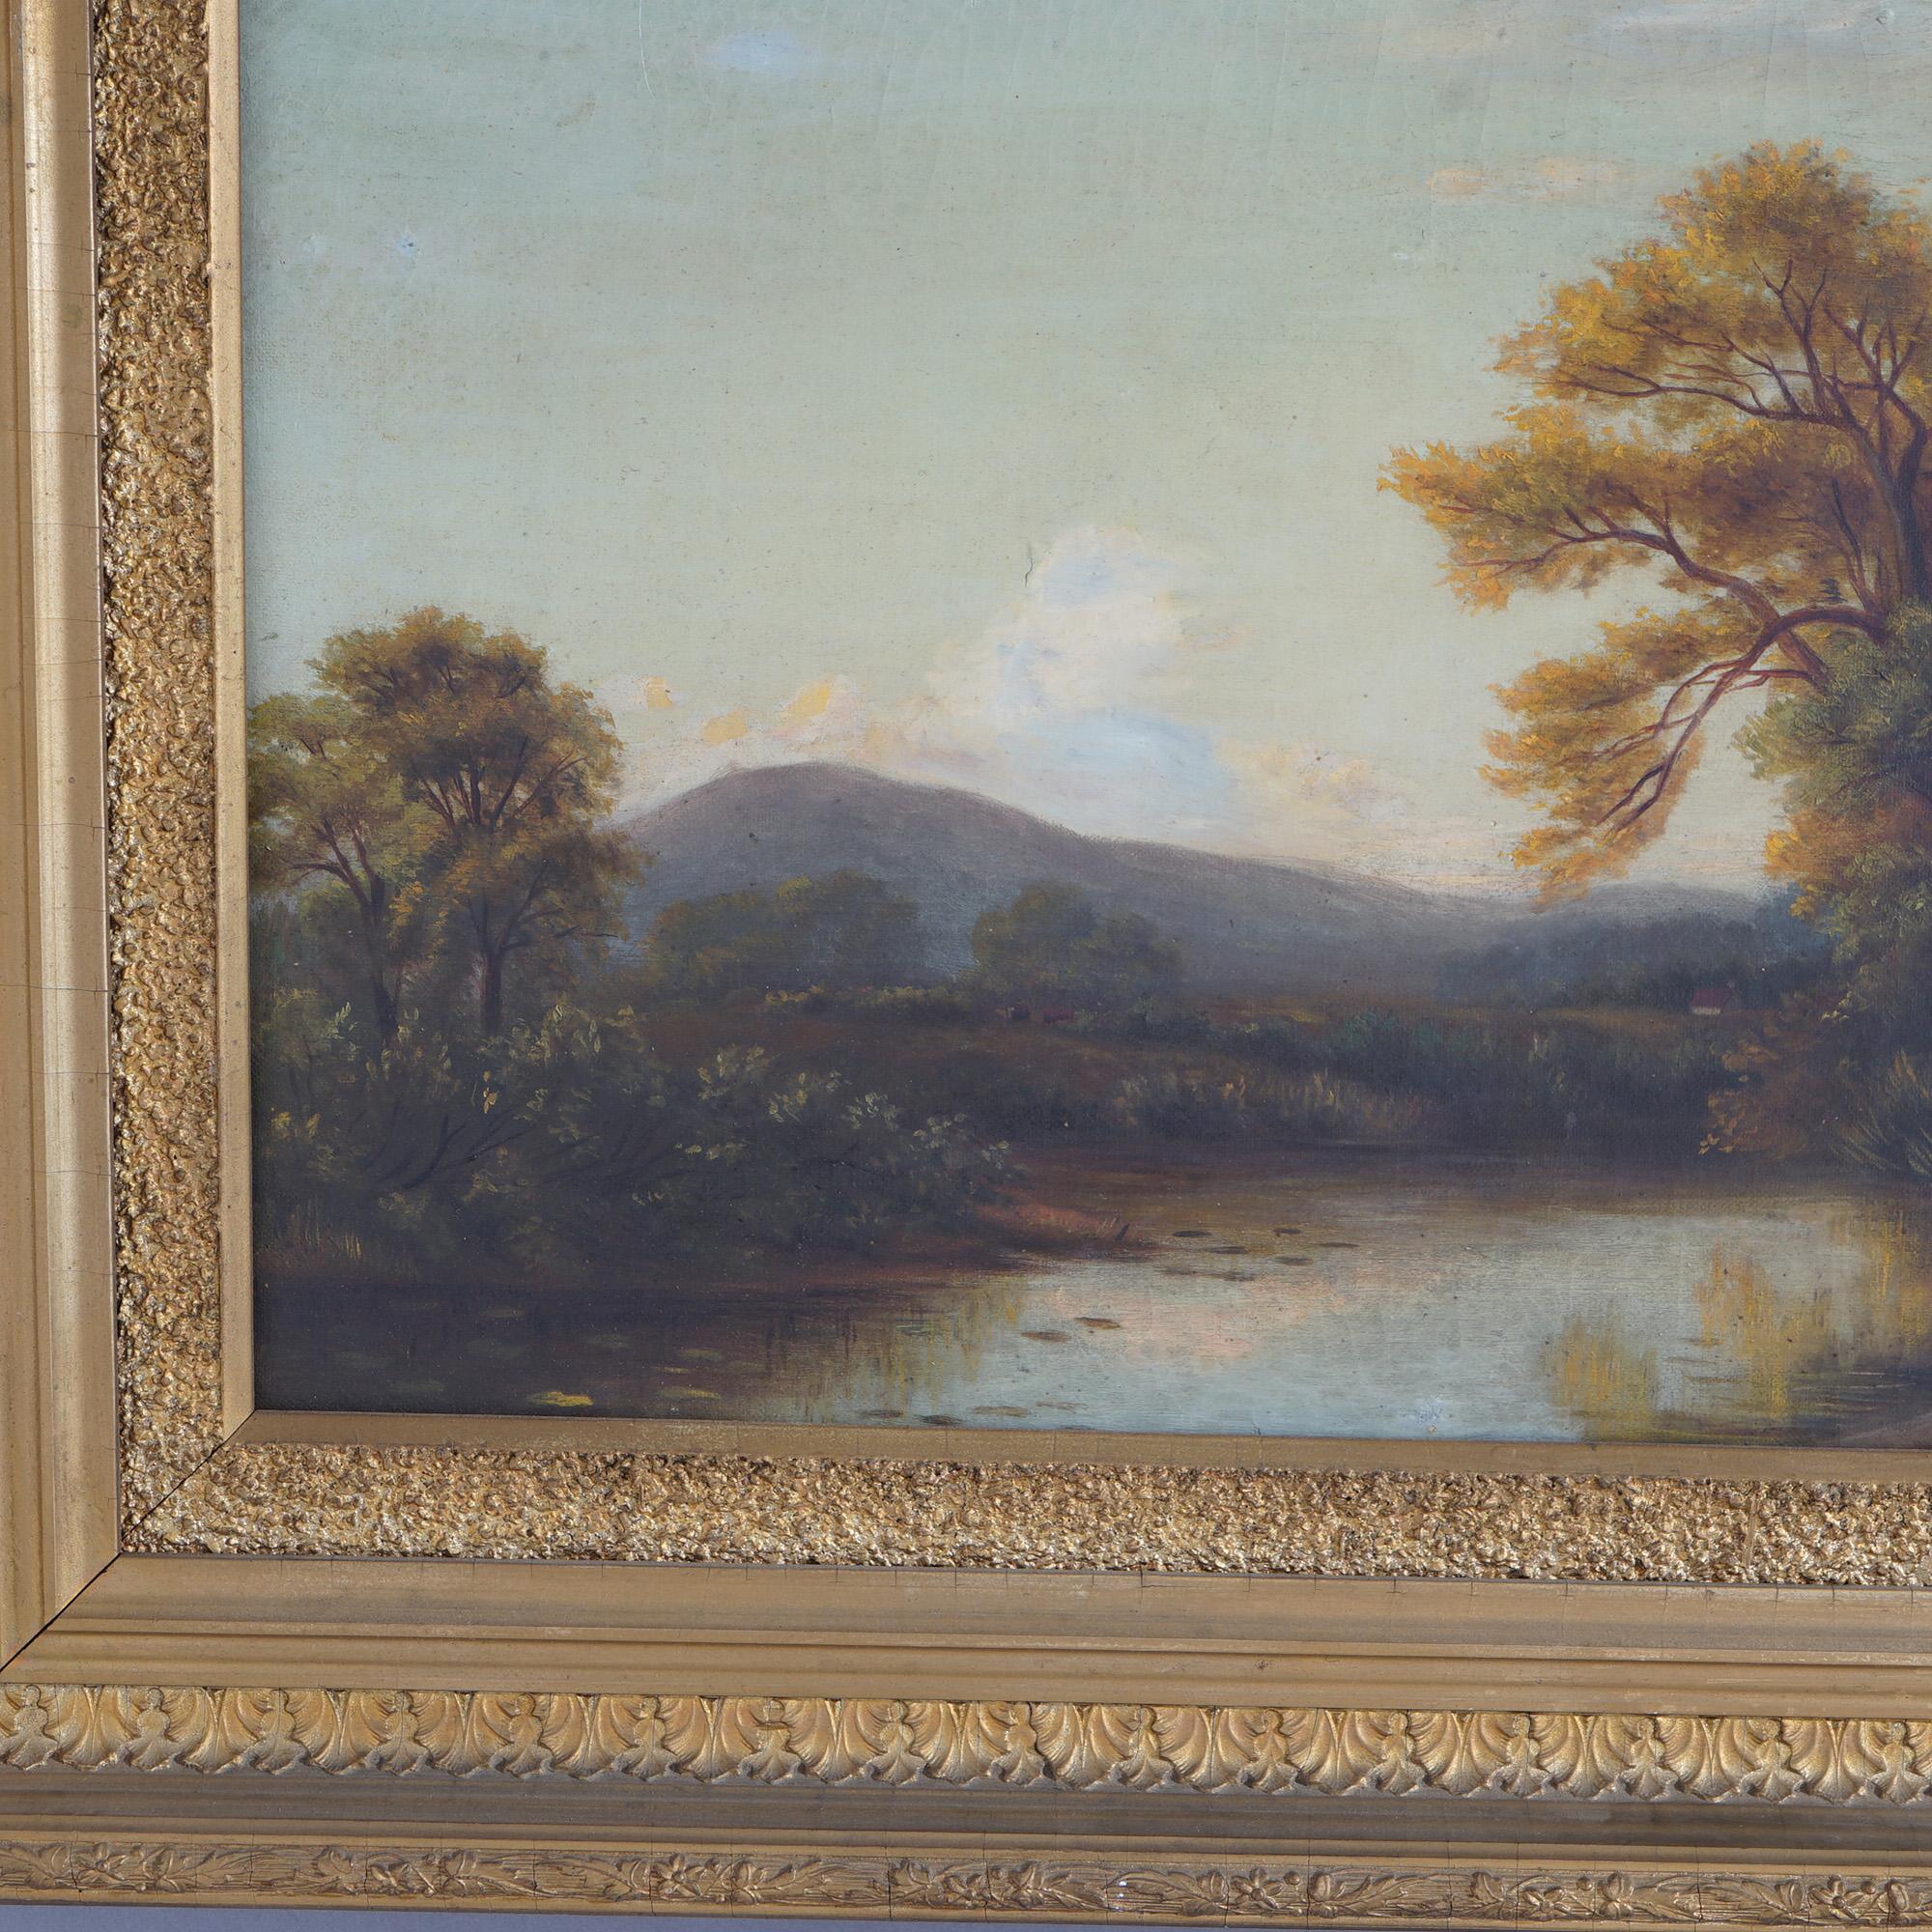 19th Century Antique Hudson River School Landscape Painting with Cattle, Stream and Church